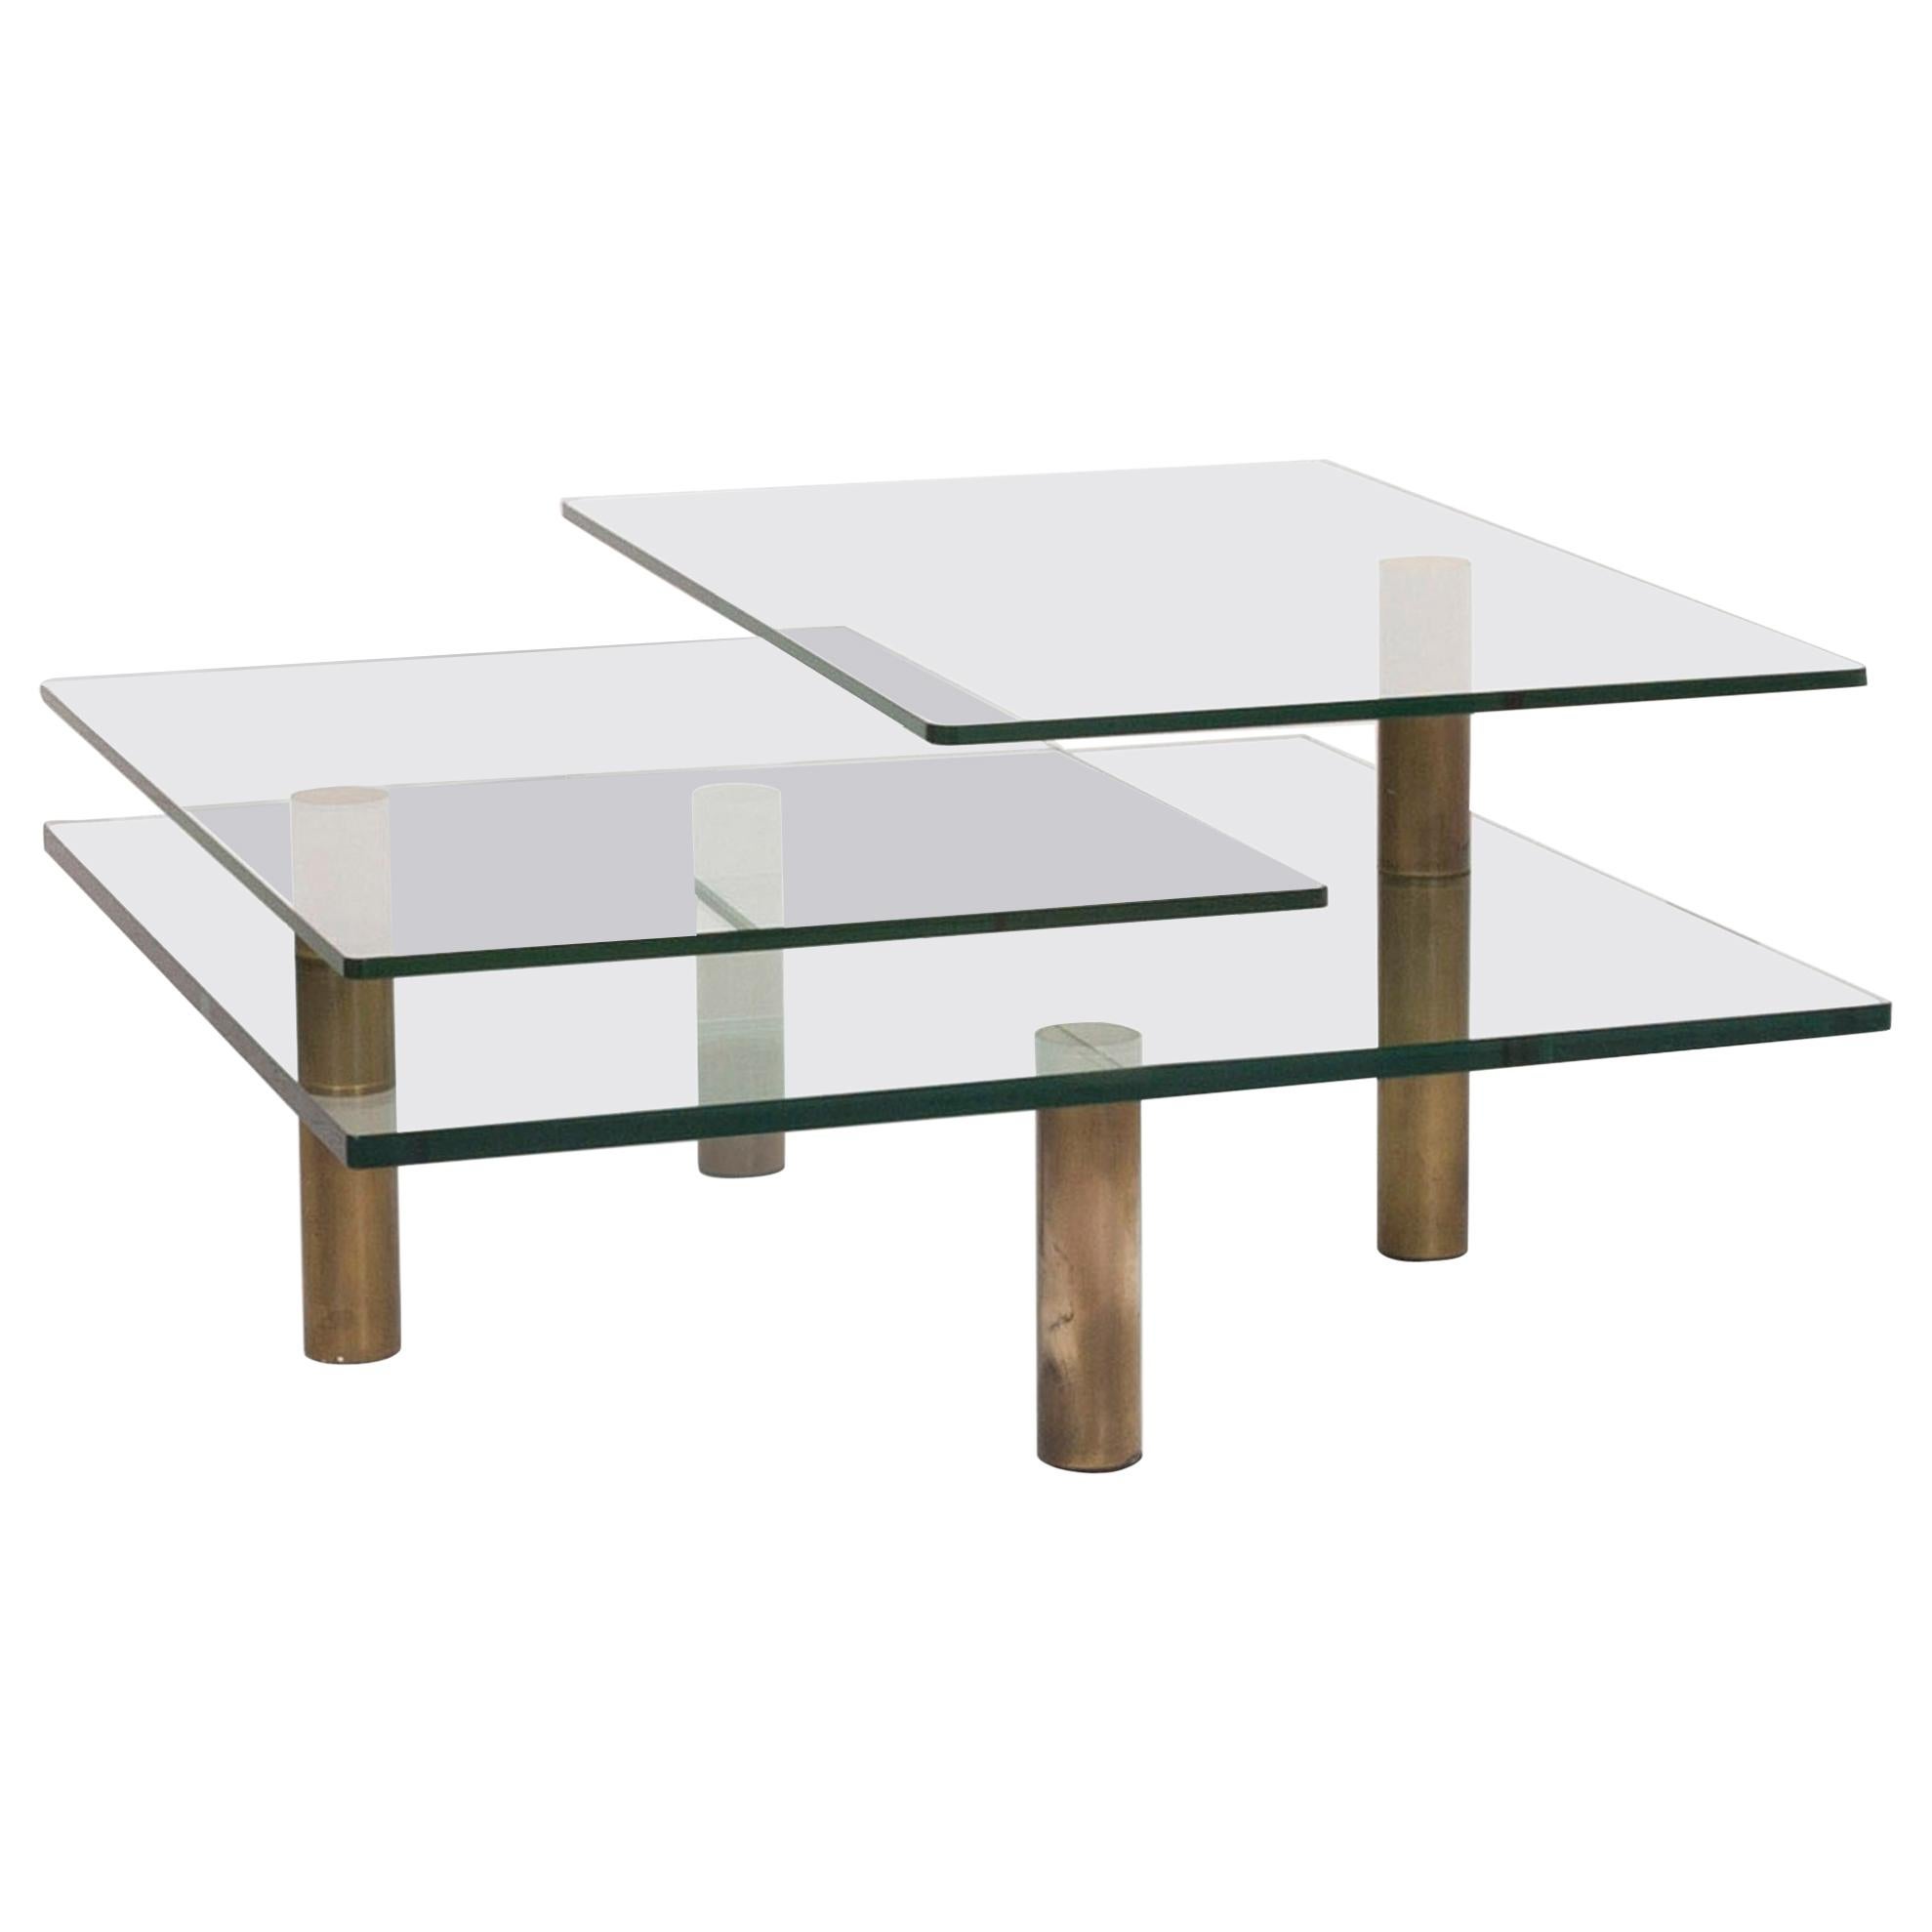 Draenert Imperial Glass Coffee Table Incl. Function For Sale